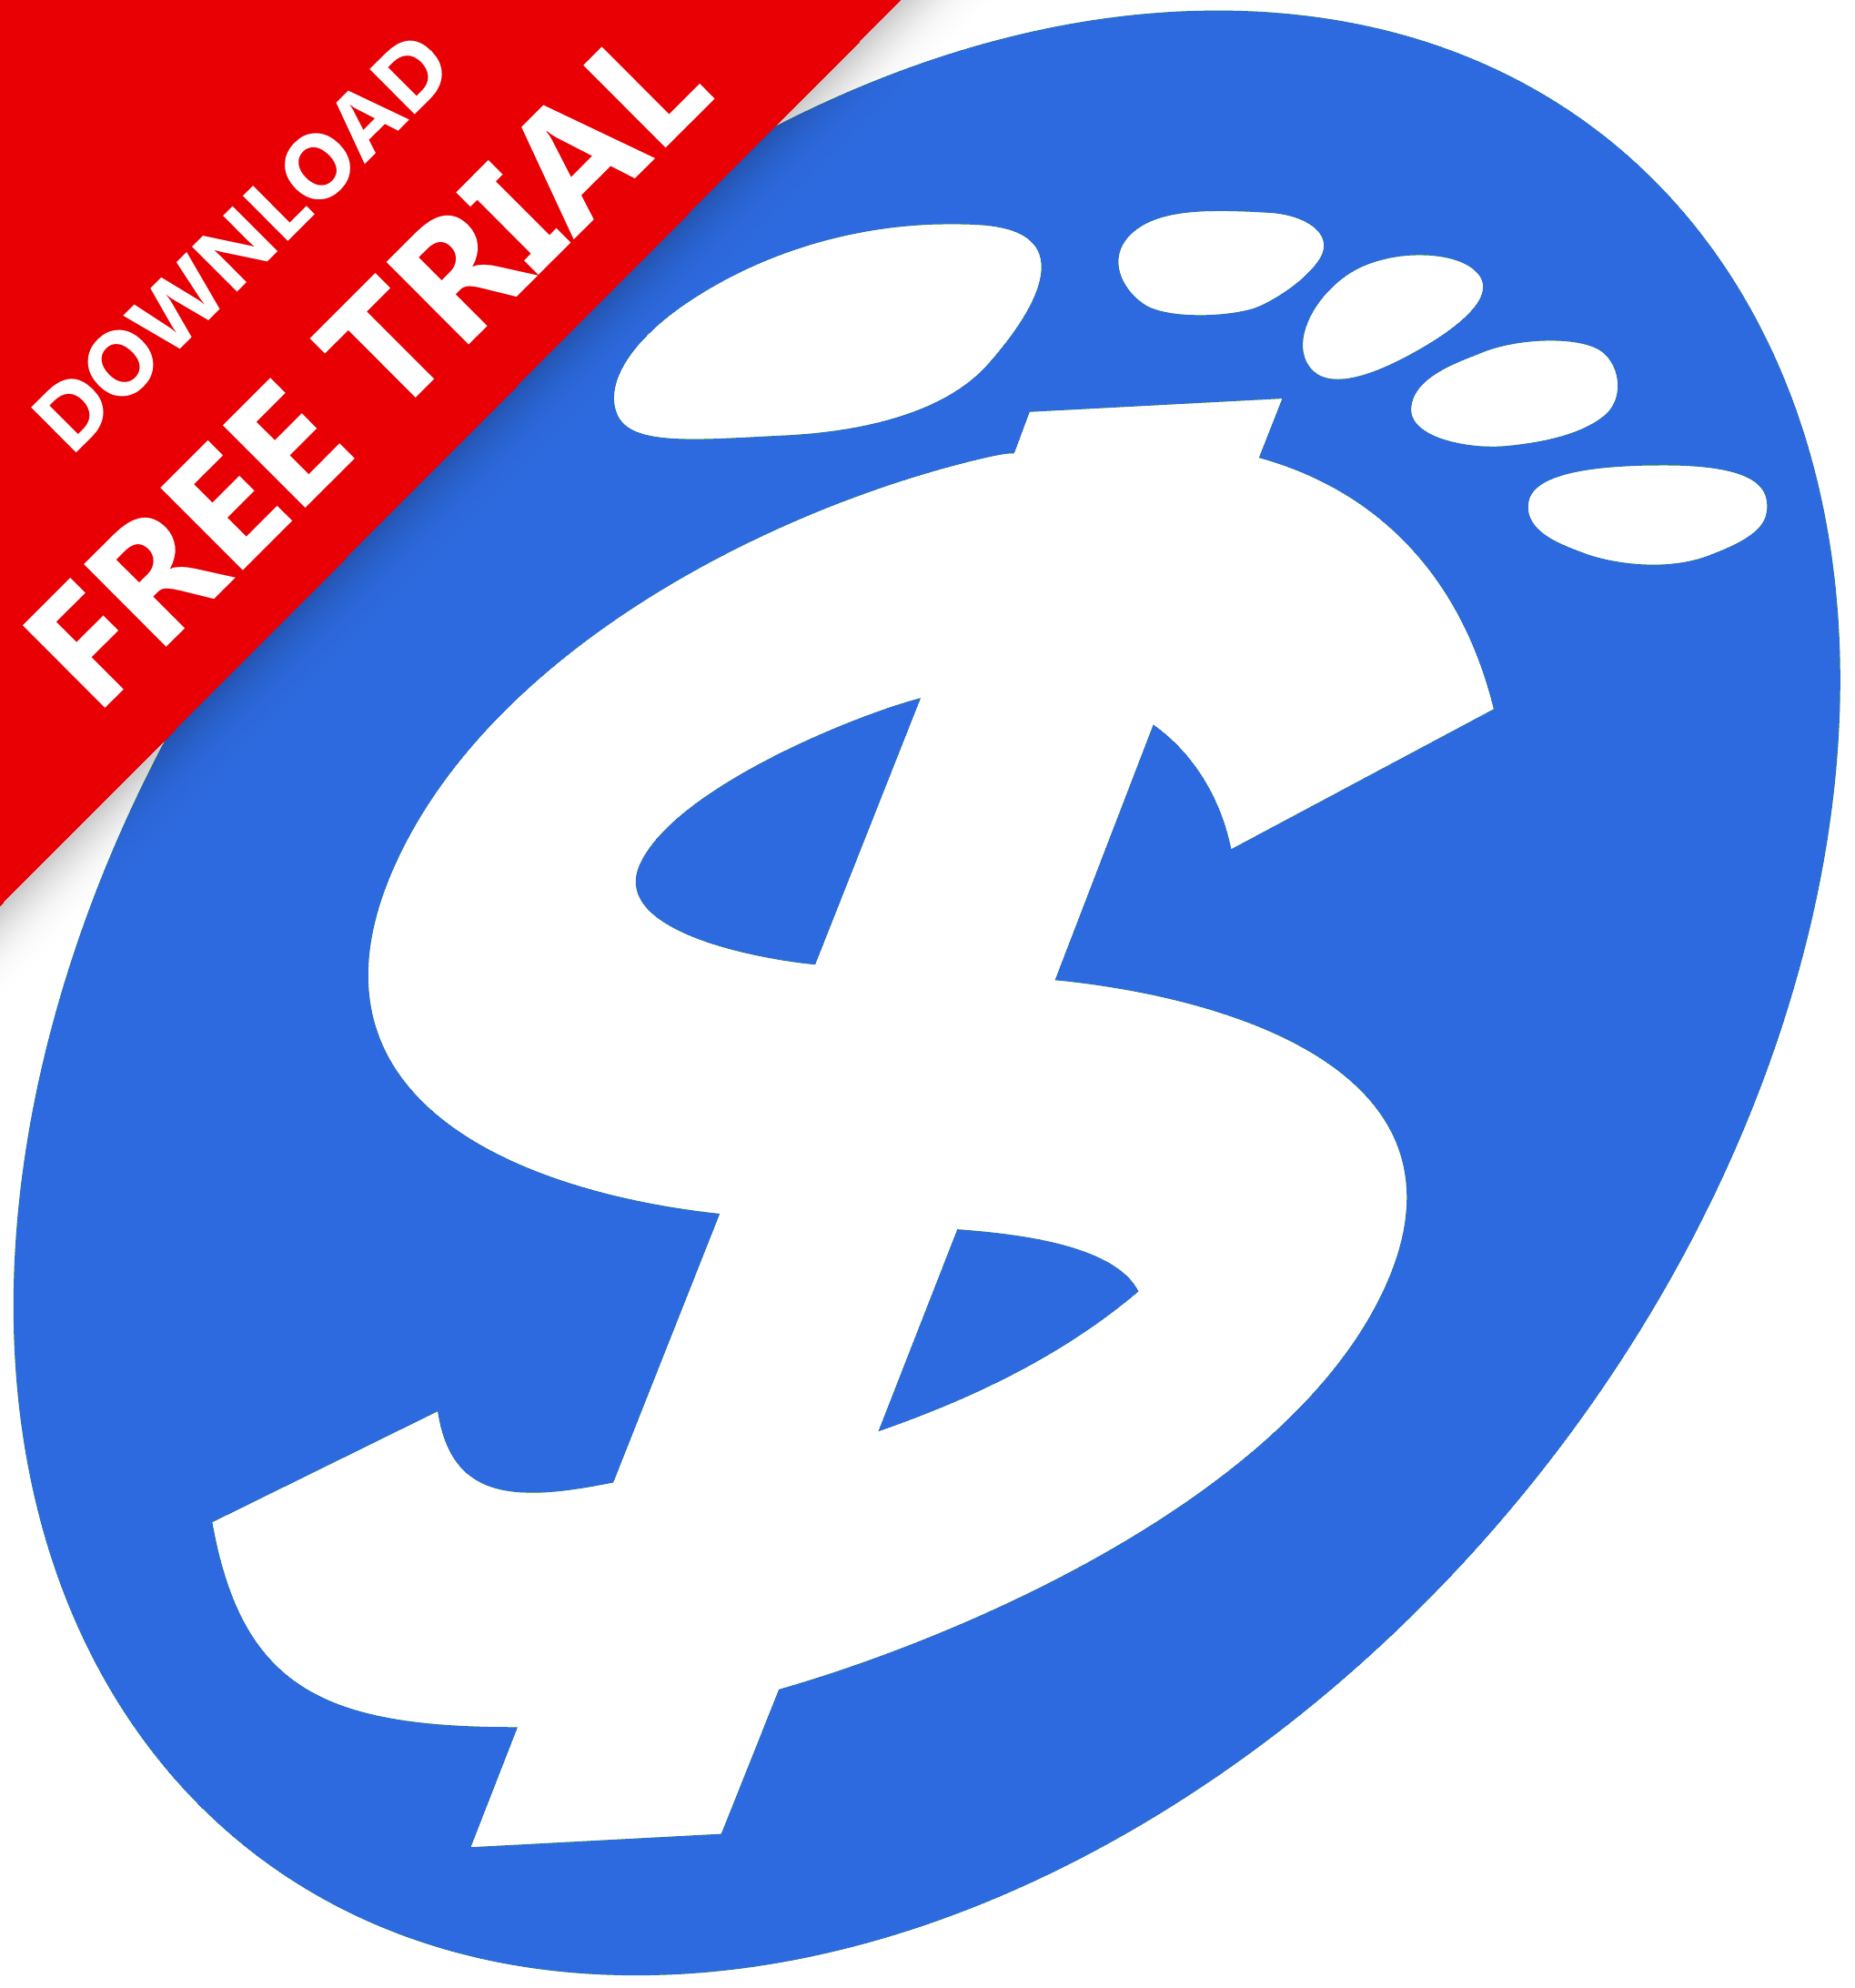 CashFootprint Standard Point-of-Sale Software for your Windows Desktop, No Monthly Fee, Not Cloud Based